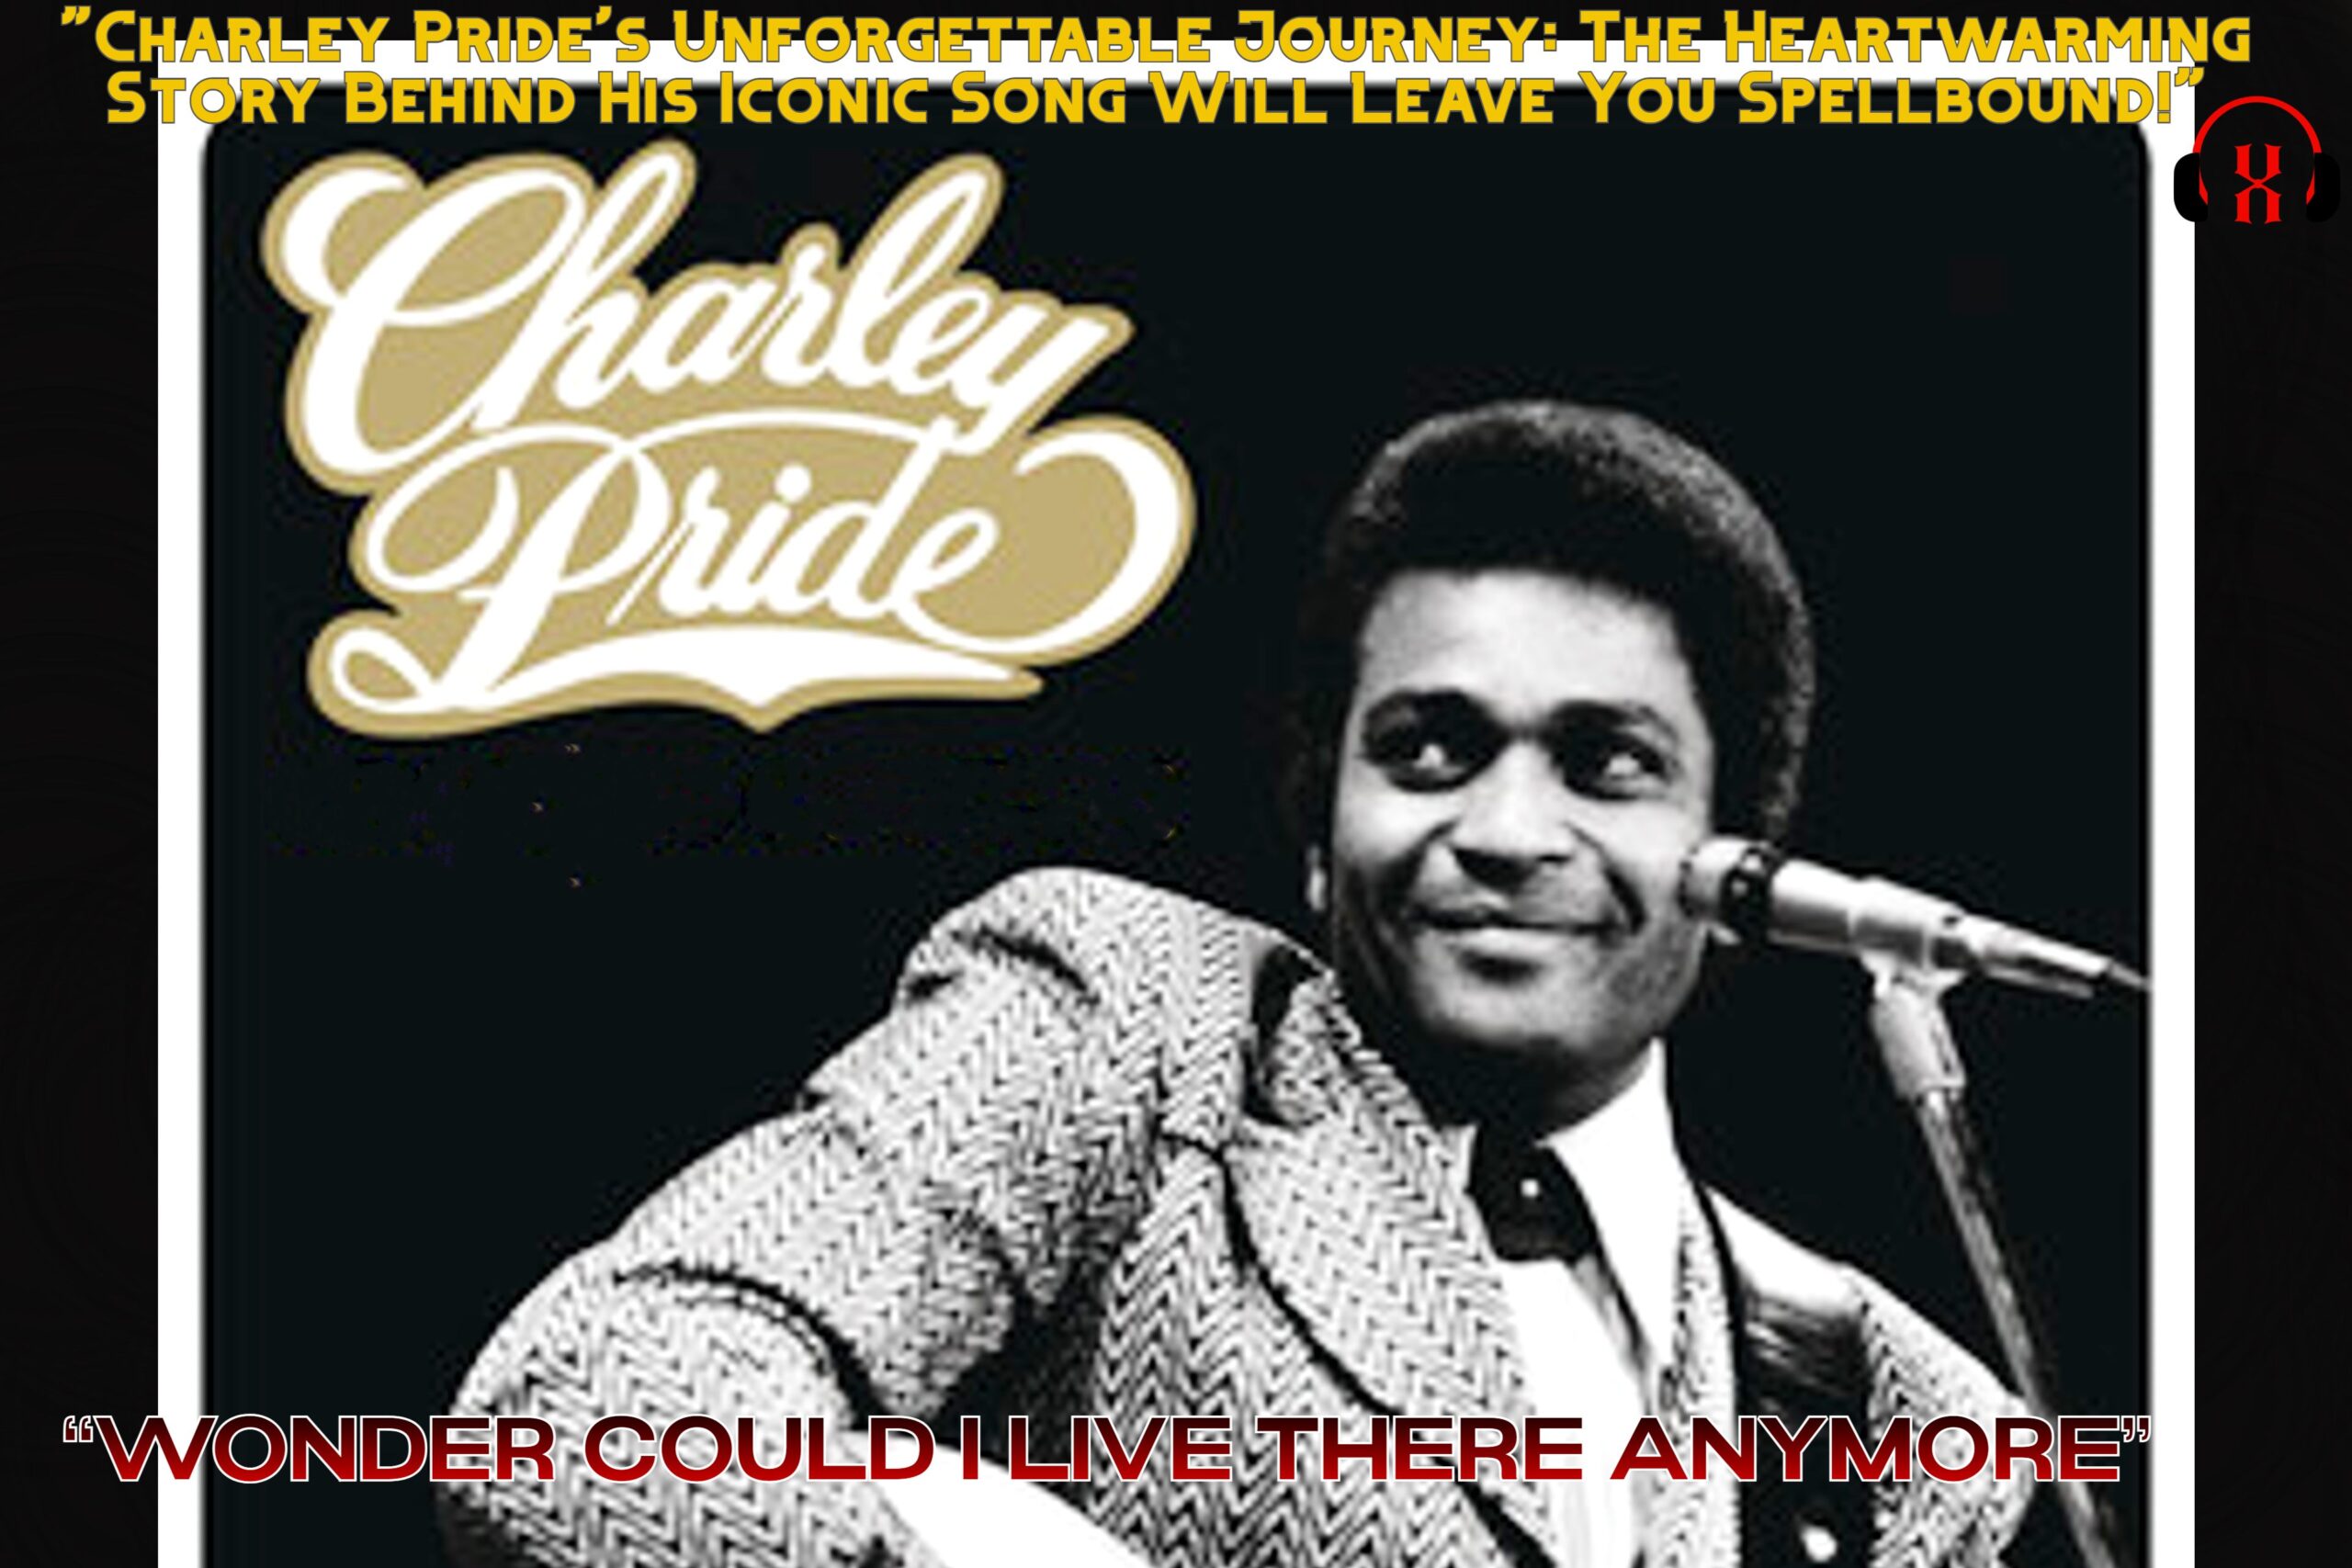 “Charley Pride’s Unforgettable Journey: The Heartwarming Story Behind His Iconic Song Will Leave You Spellbound!”